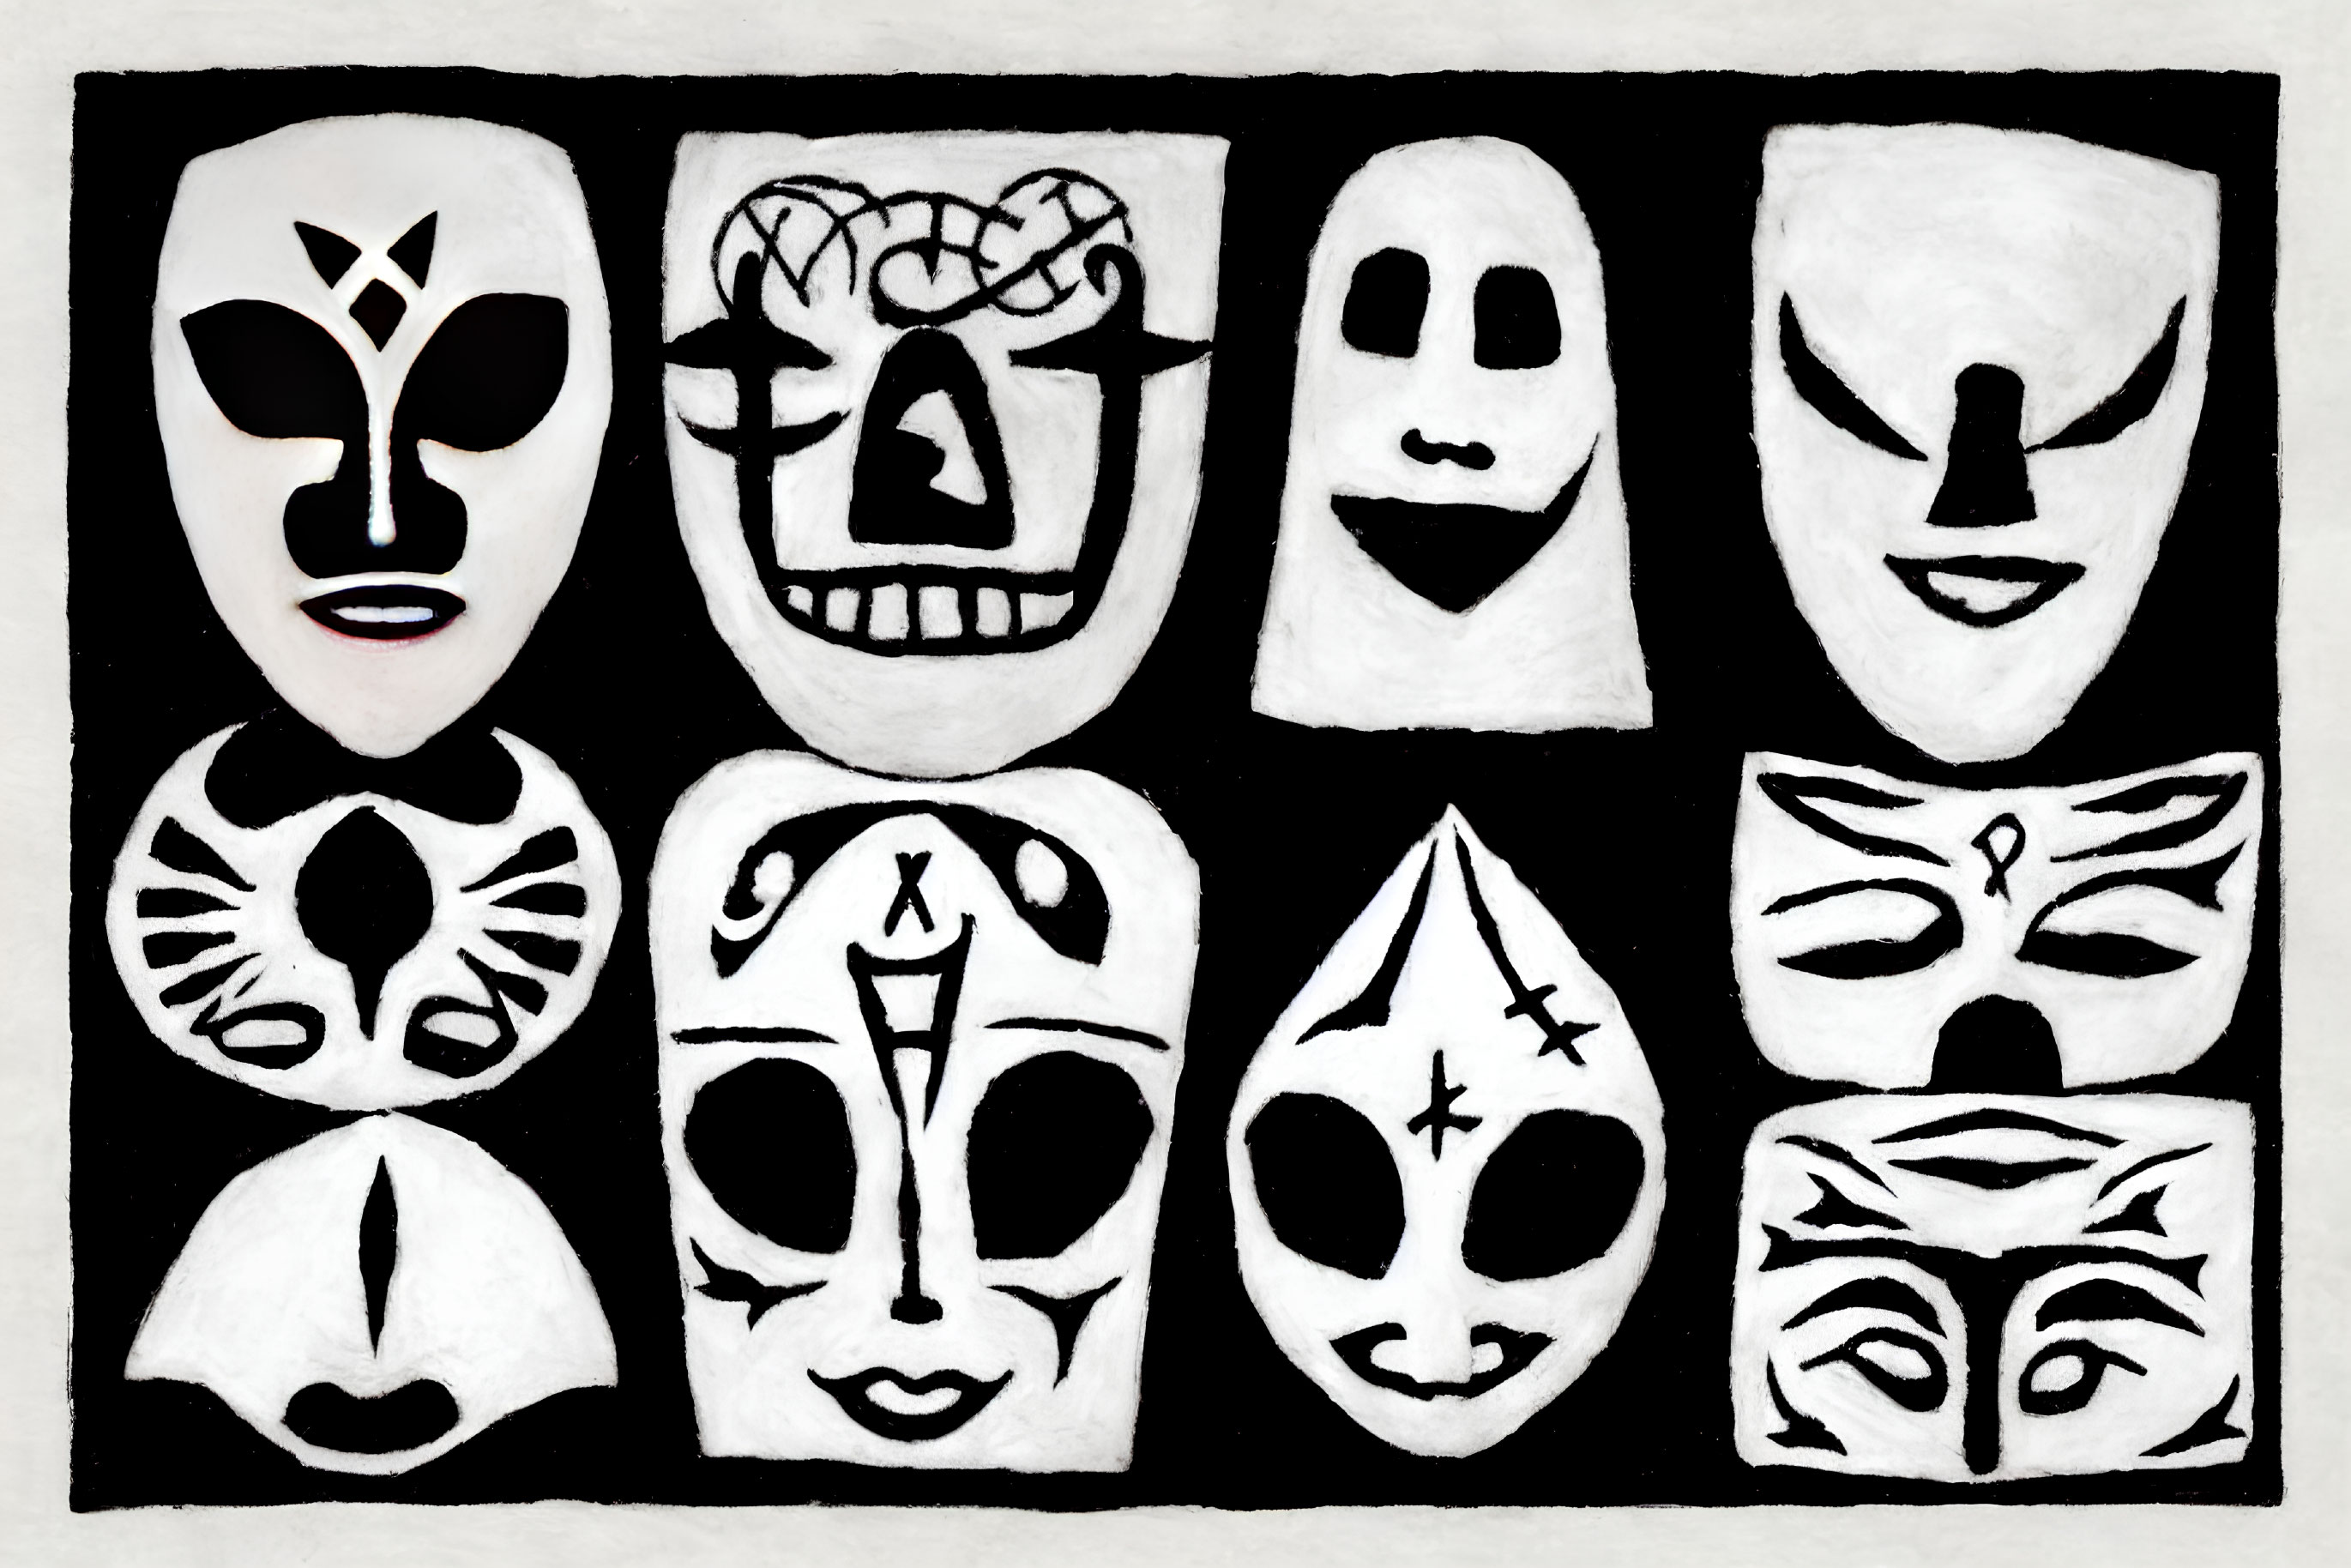 Nine Stylized Black and White Masks with Unique Facial Designs